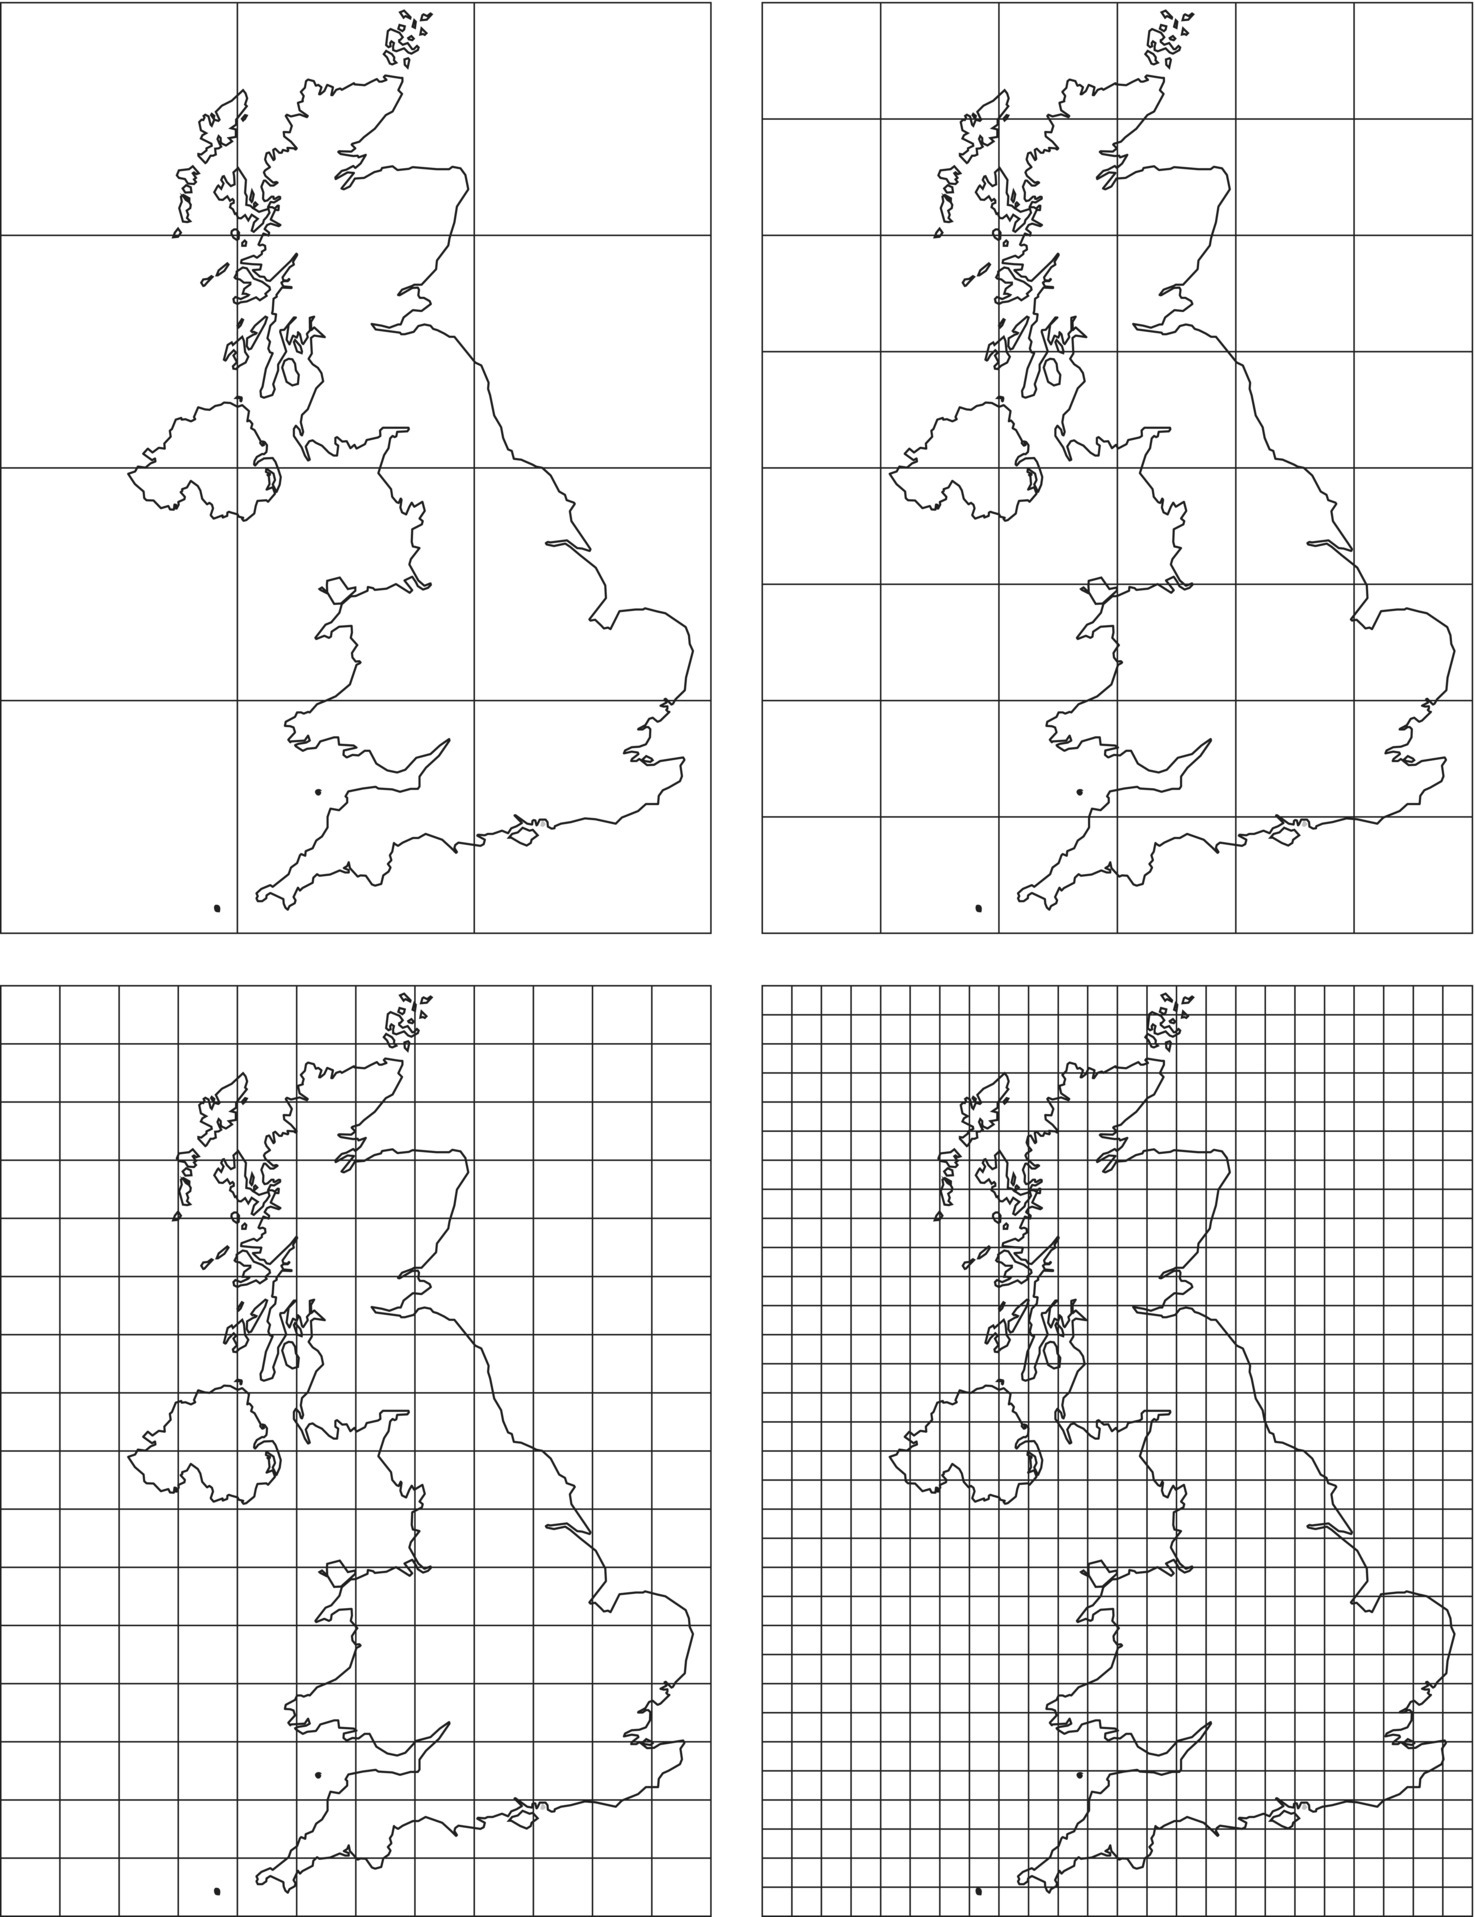 Map of Great Britain in a 4 by 3 (top left), 8 by 6 (top right), 16 by 12 (bottom left), and 32 by 24 (bottom right) grid.